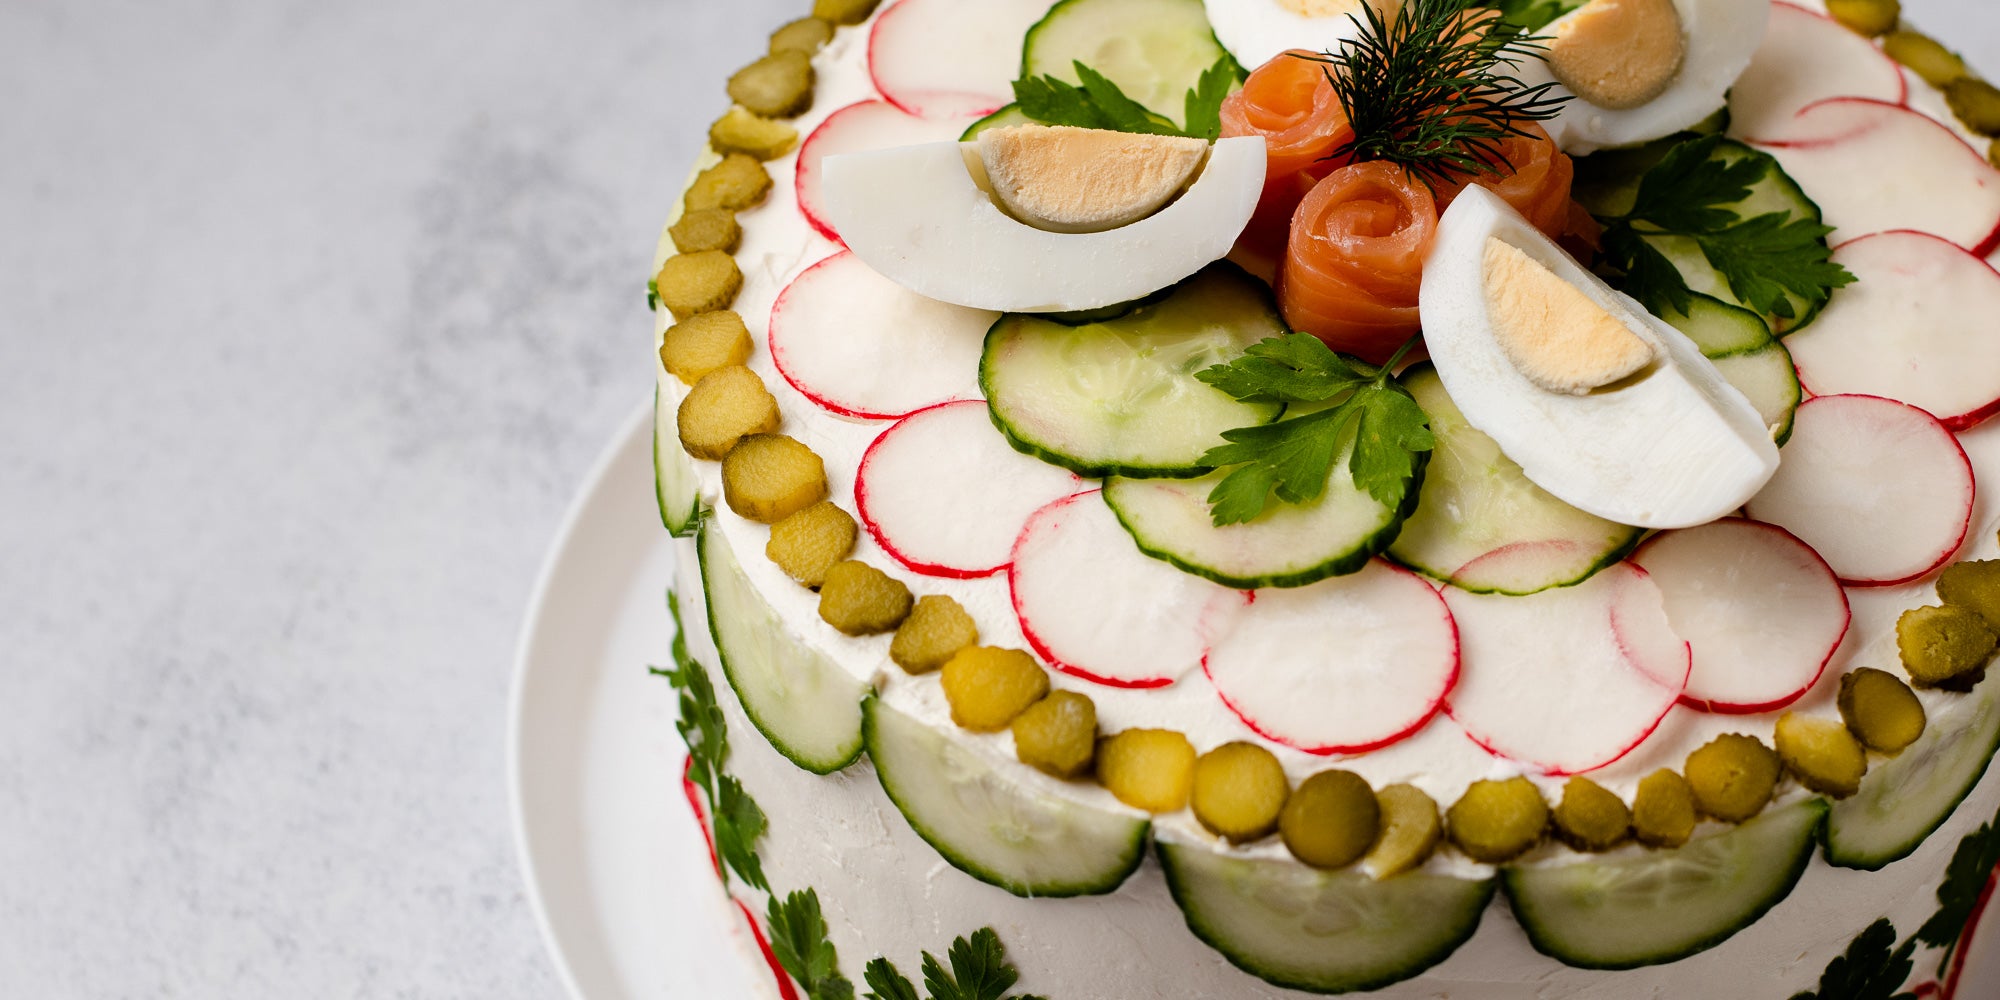 Close up of sandwich cake on white plate